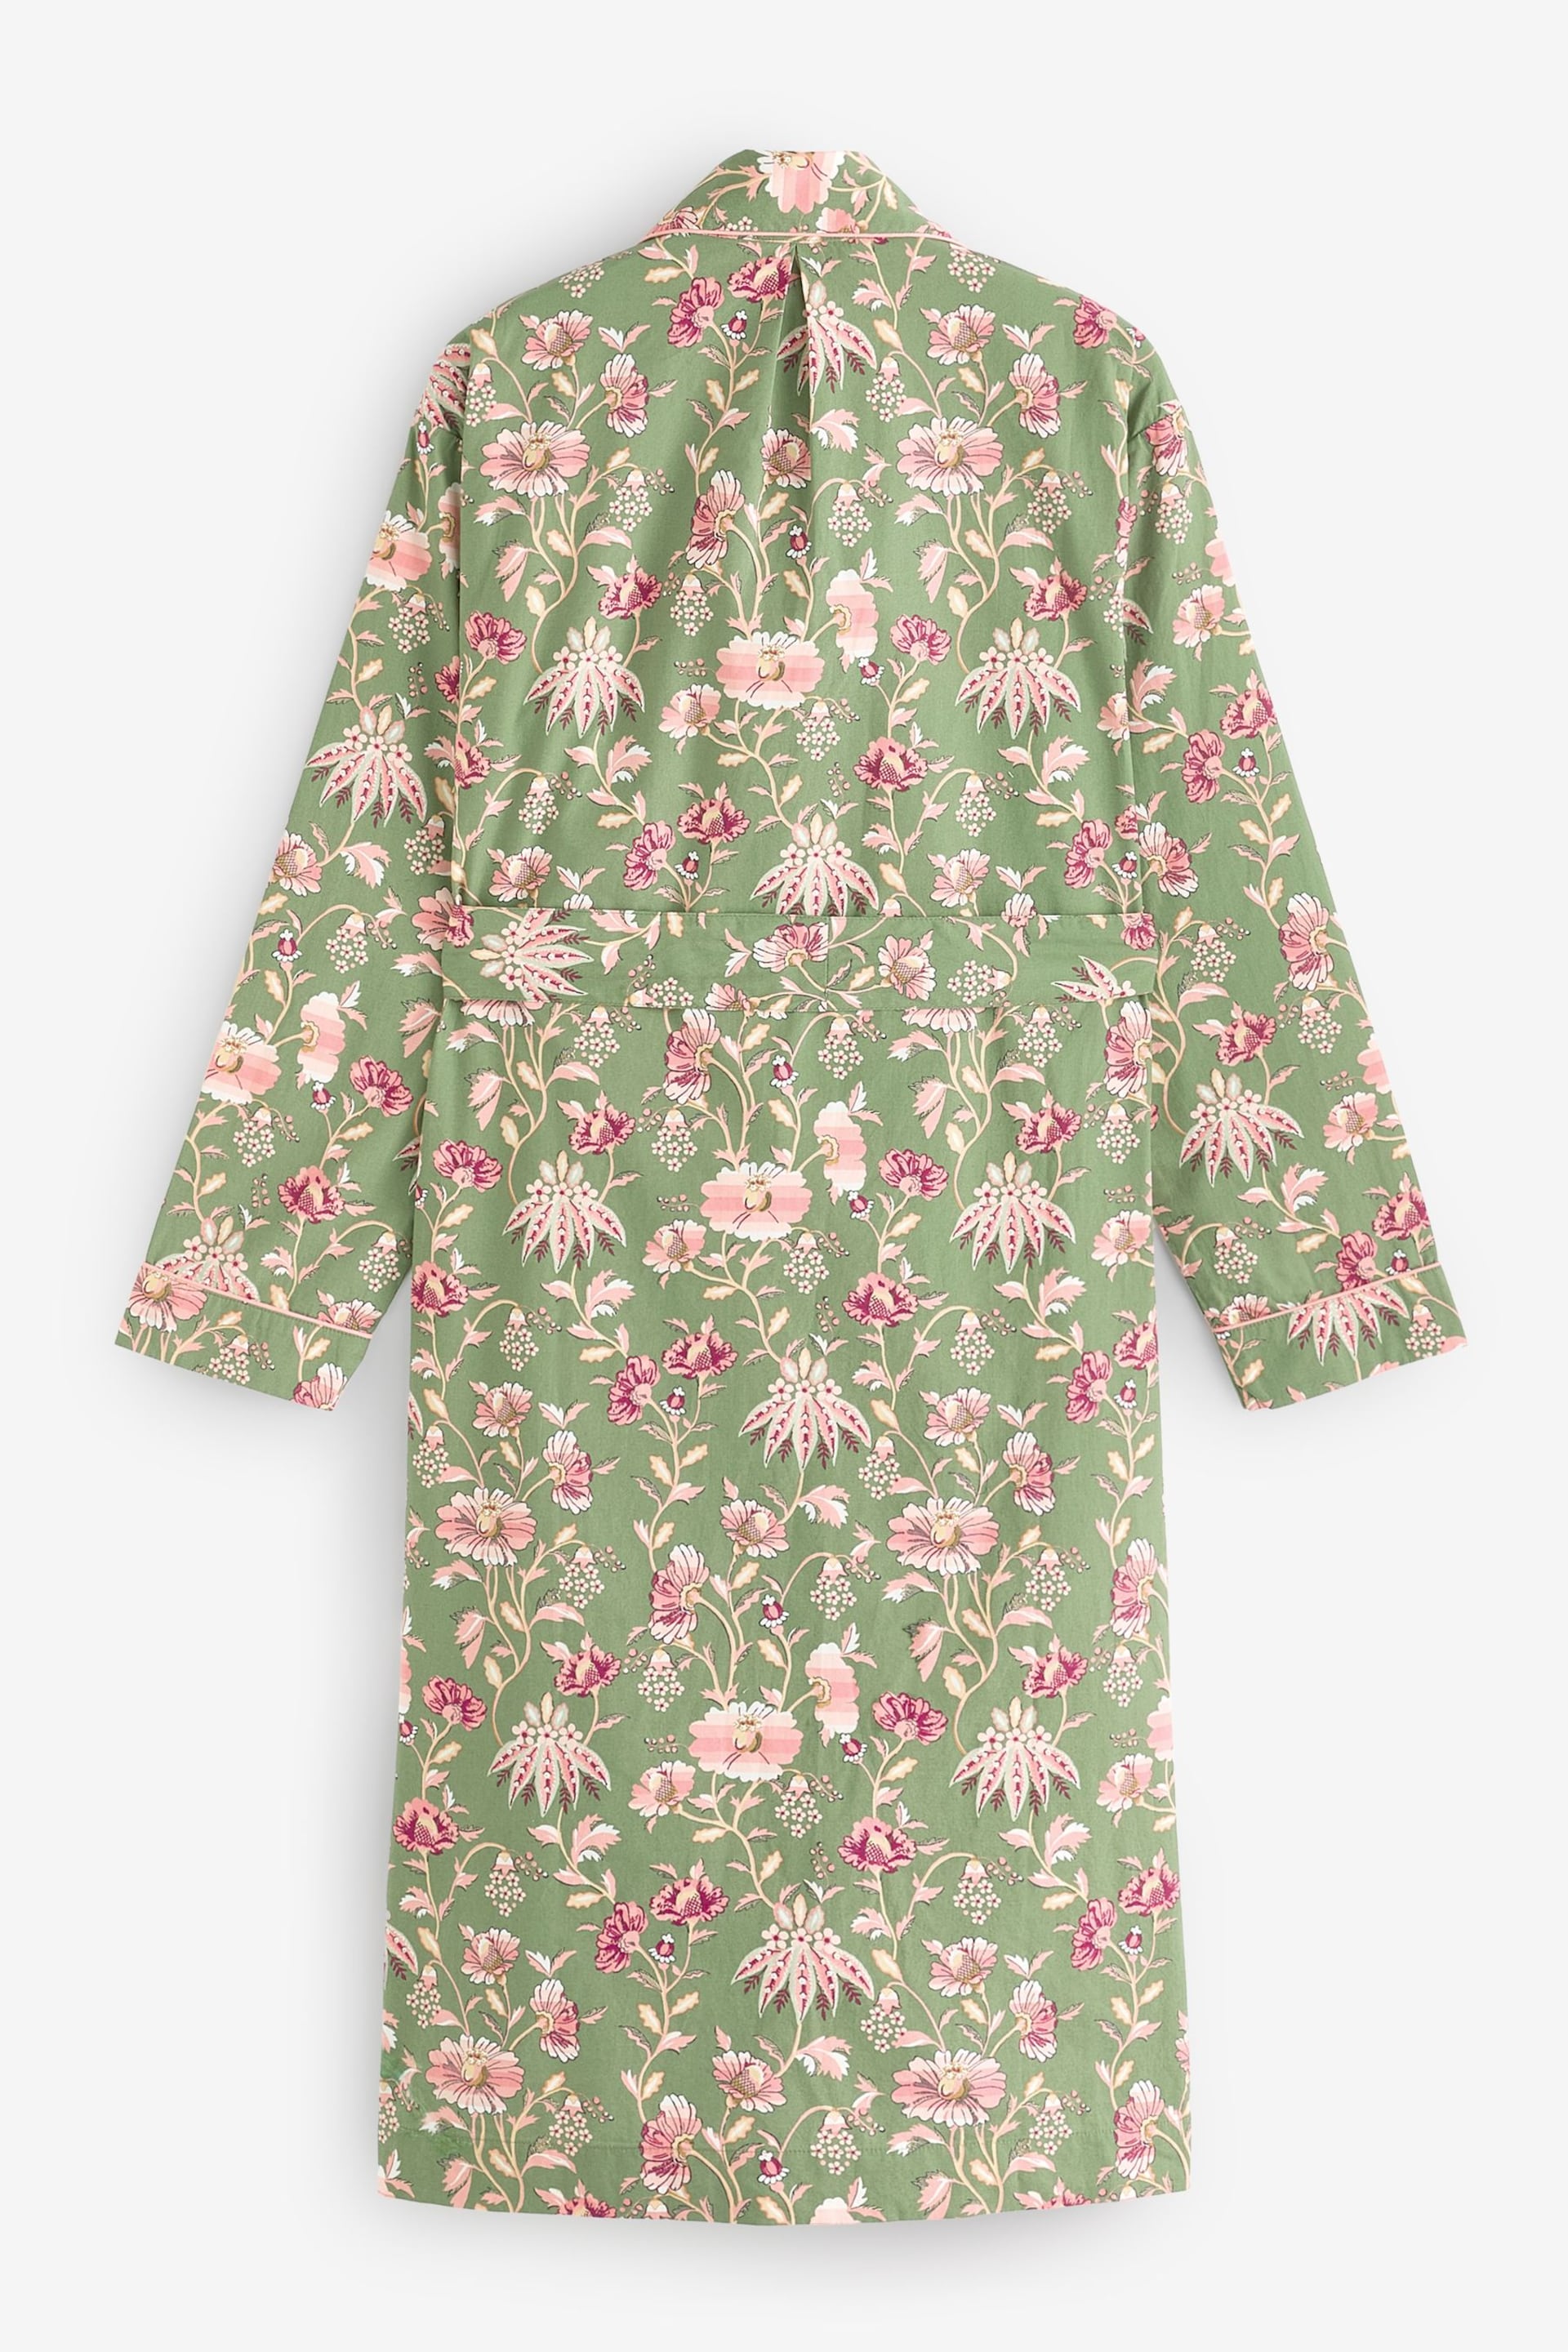 Cath Kidston Green Floral Cotton Poplin Wrap Dressing Gown - Image 2 of 2